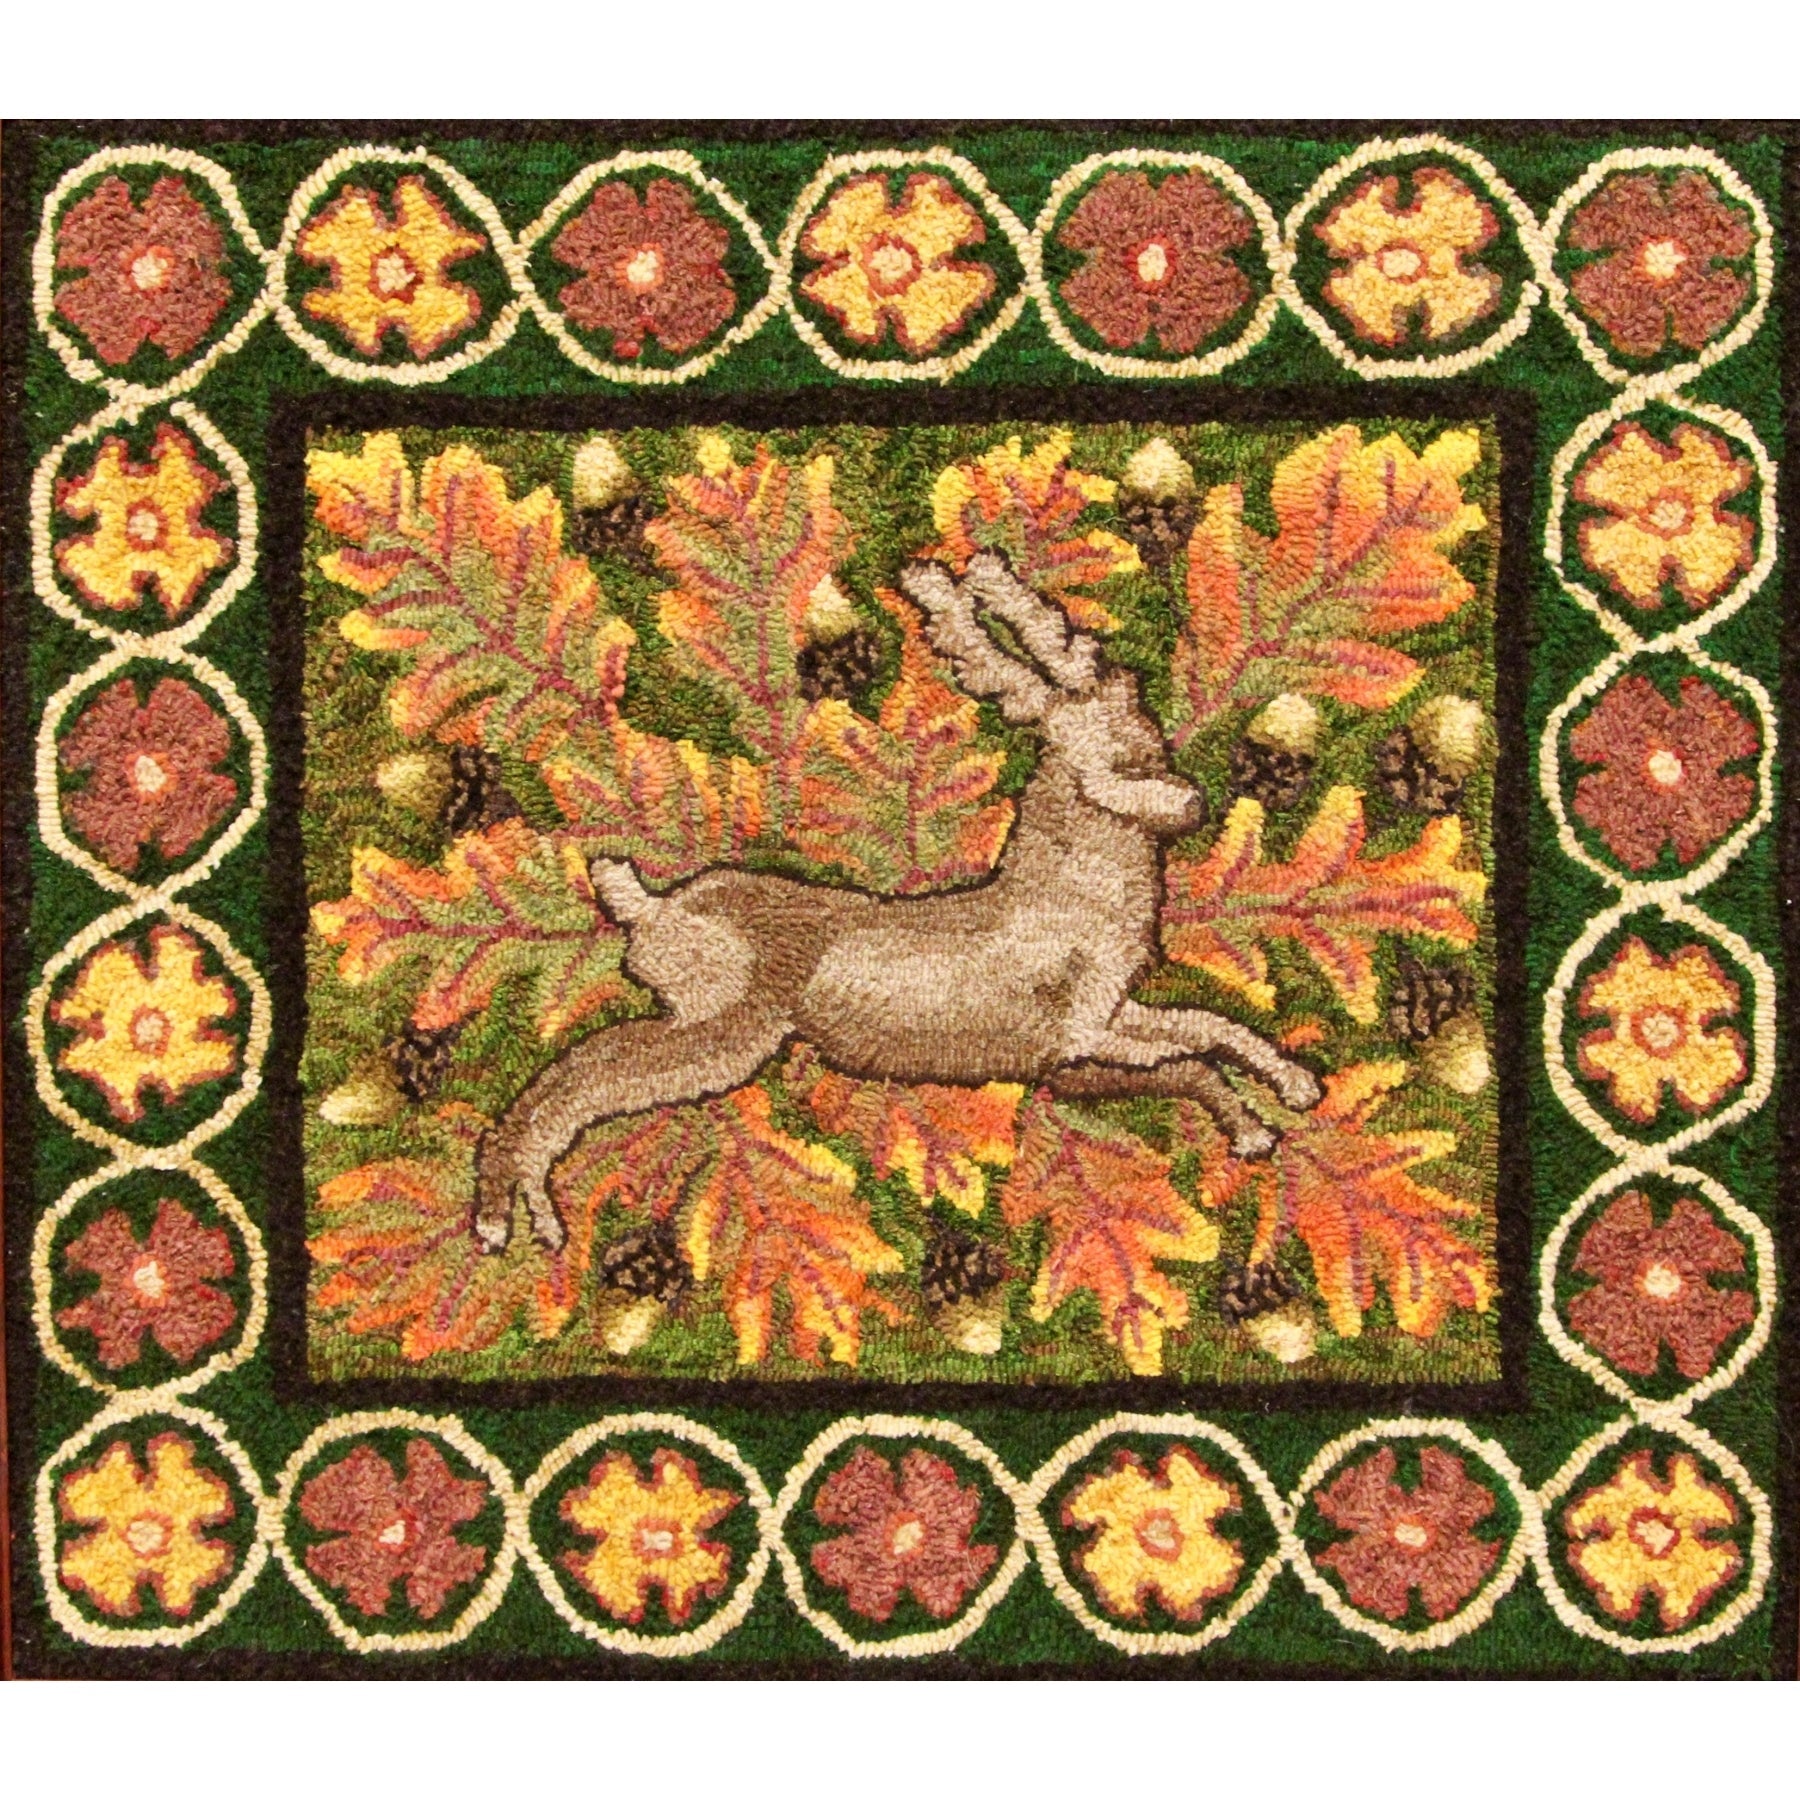 English Stag, rug hooked by Jenna Sleeper